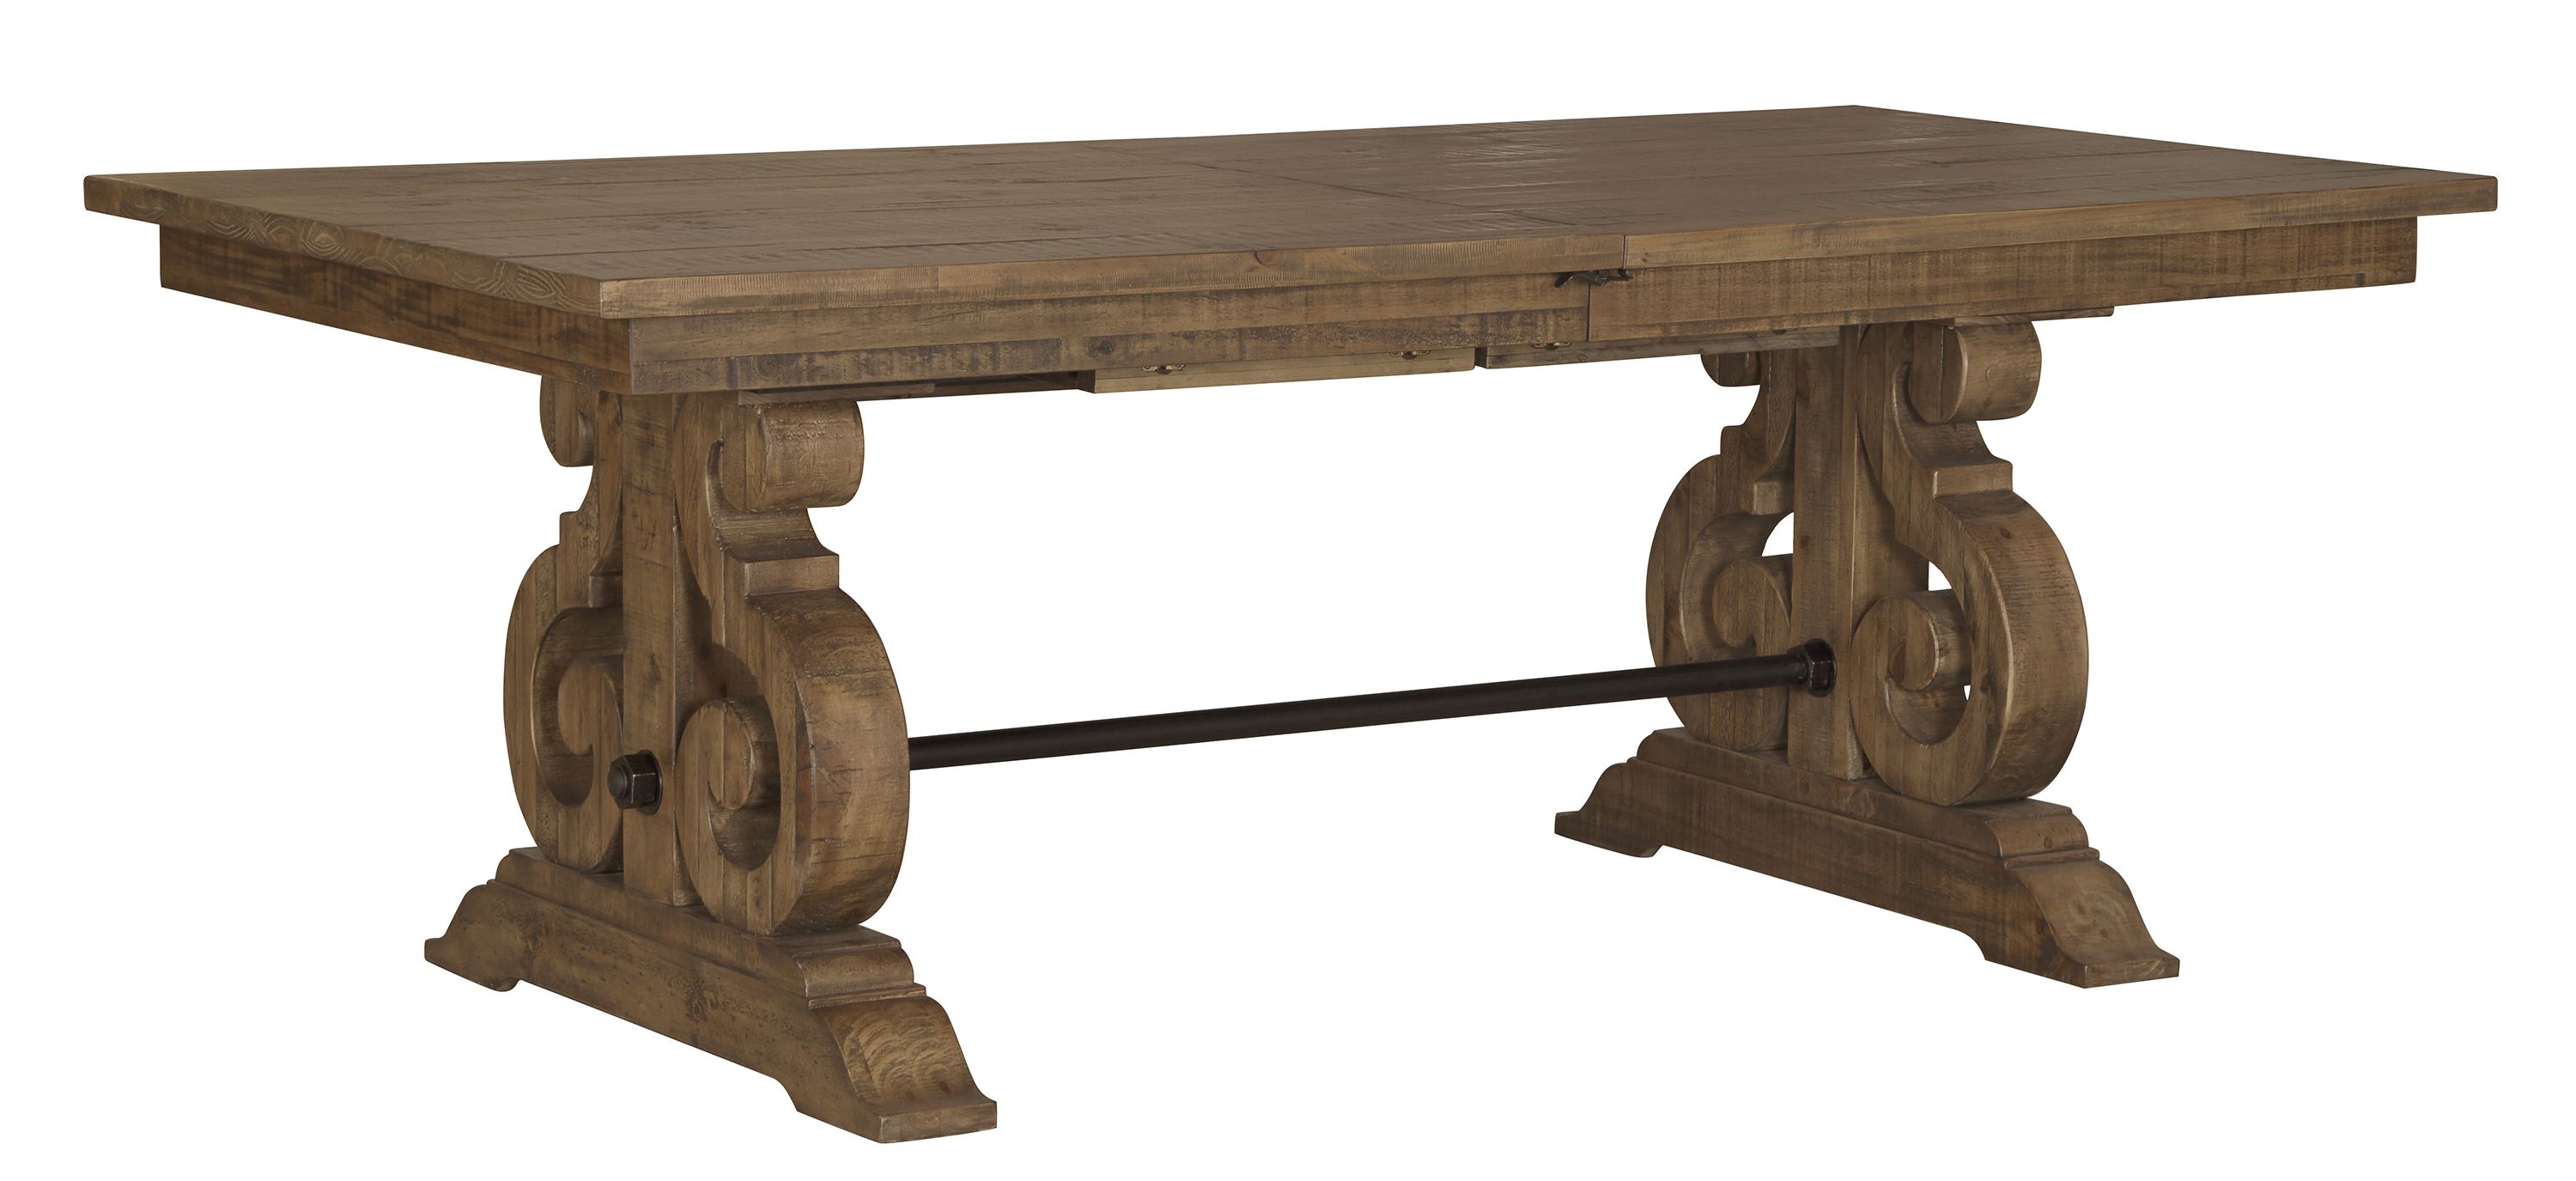 Bellamy Dining Table with Leaves